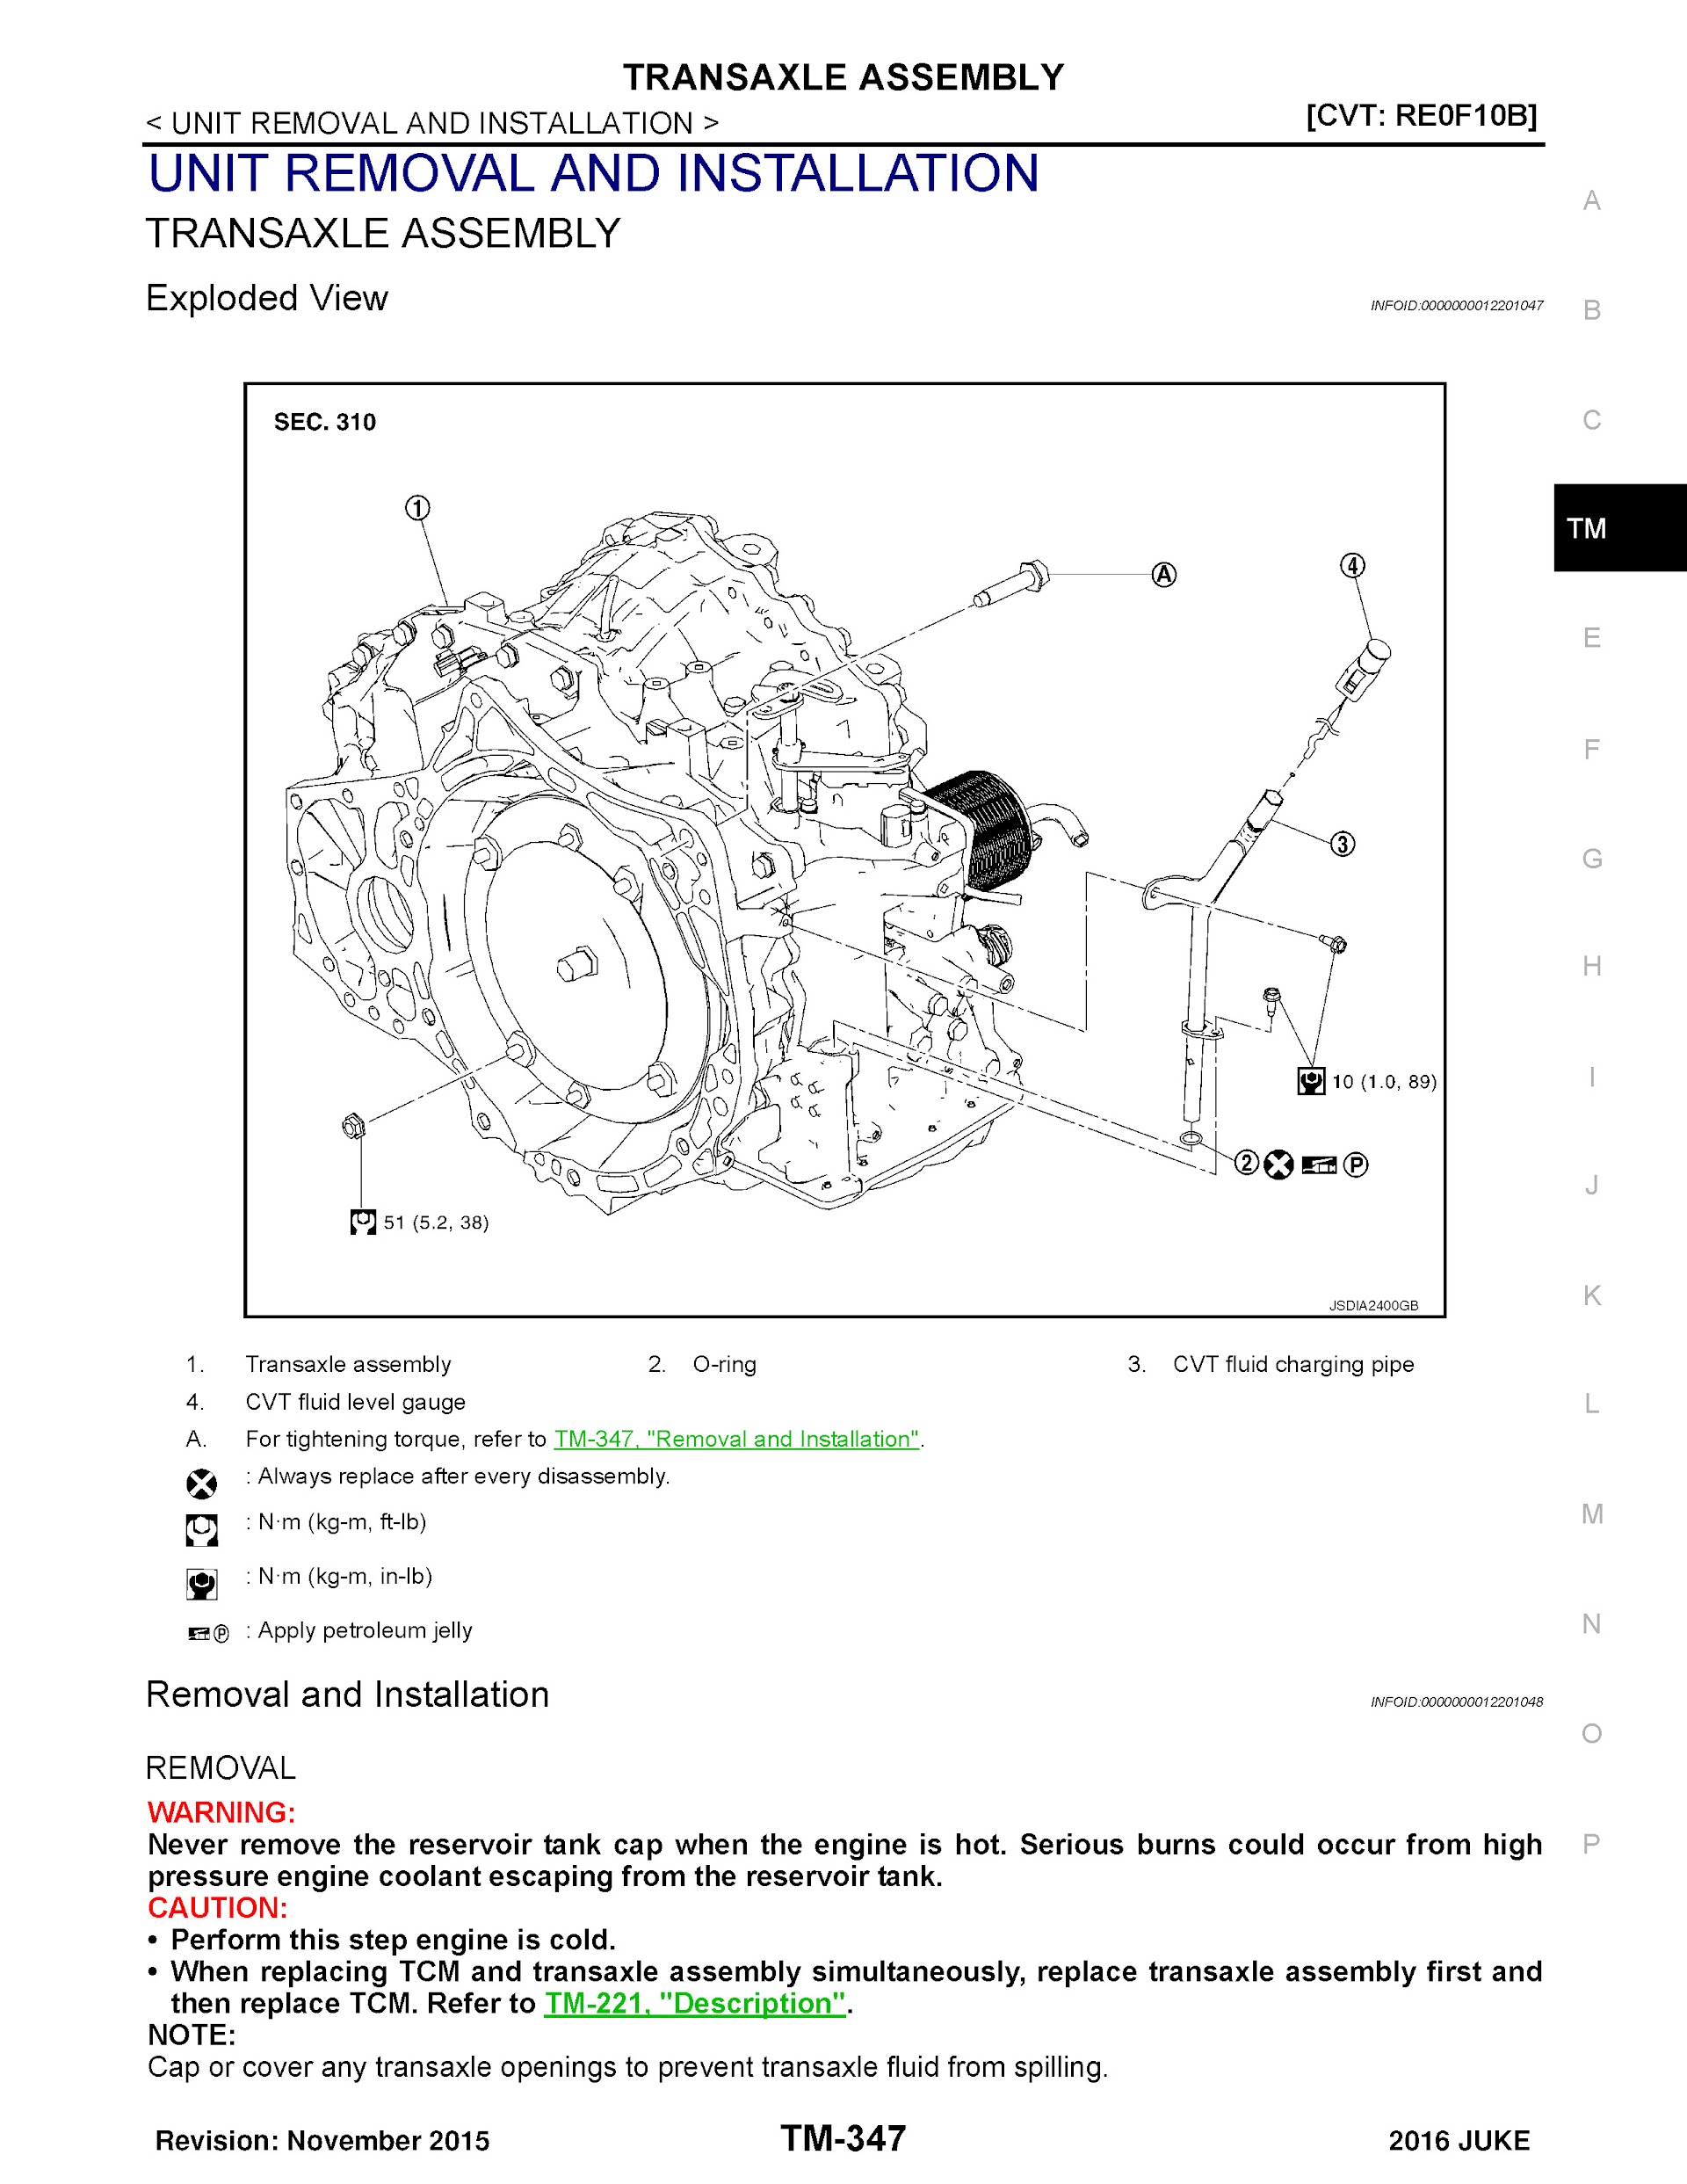 CONTENTS: 2016 Nissan Juke Repair Manual, Transaxle Assembly Unit Removal and Installation